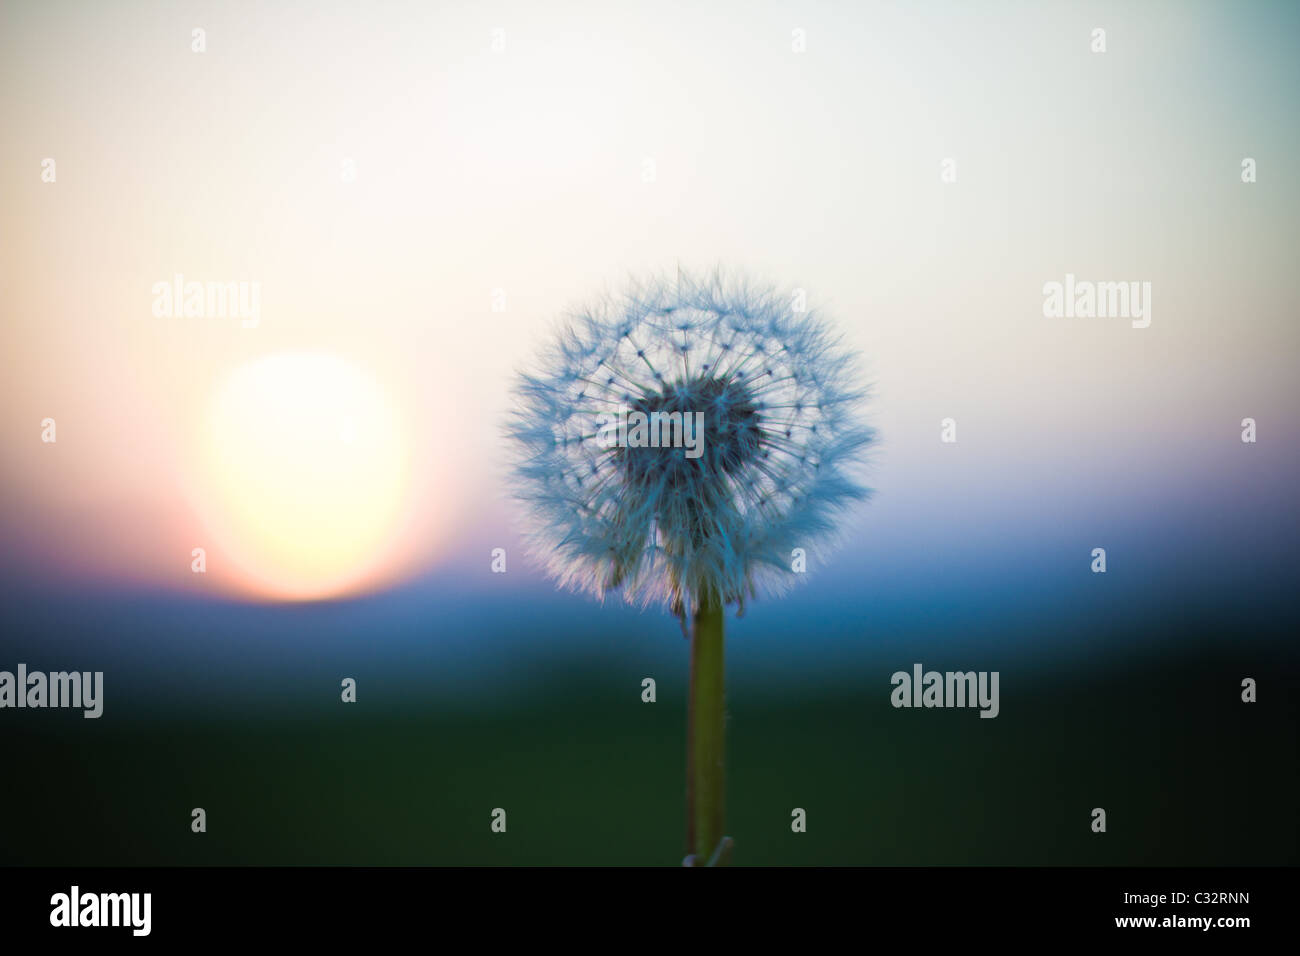 A dandelion at sunset Stock Photo